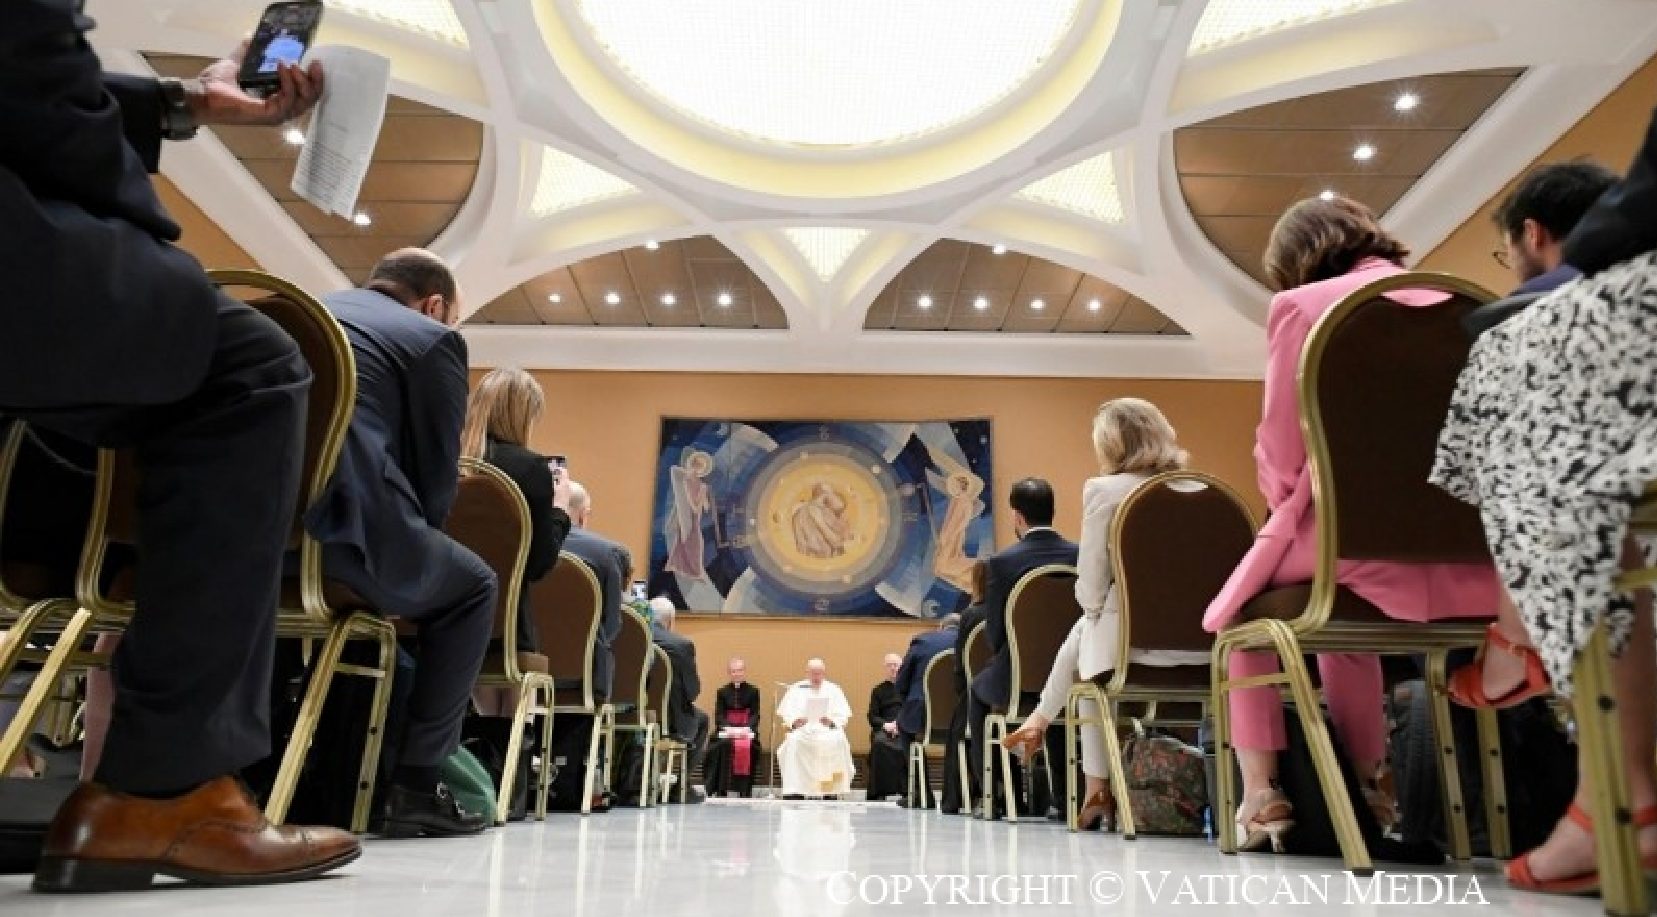 Pope Francis received the participants in the "Debt Crisis in the Global South"